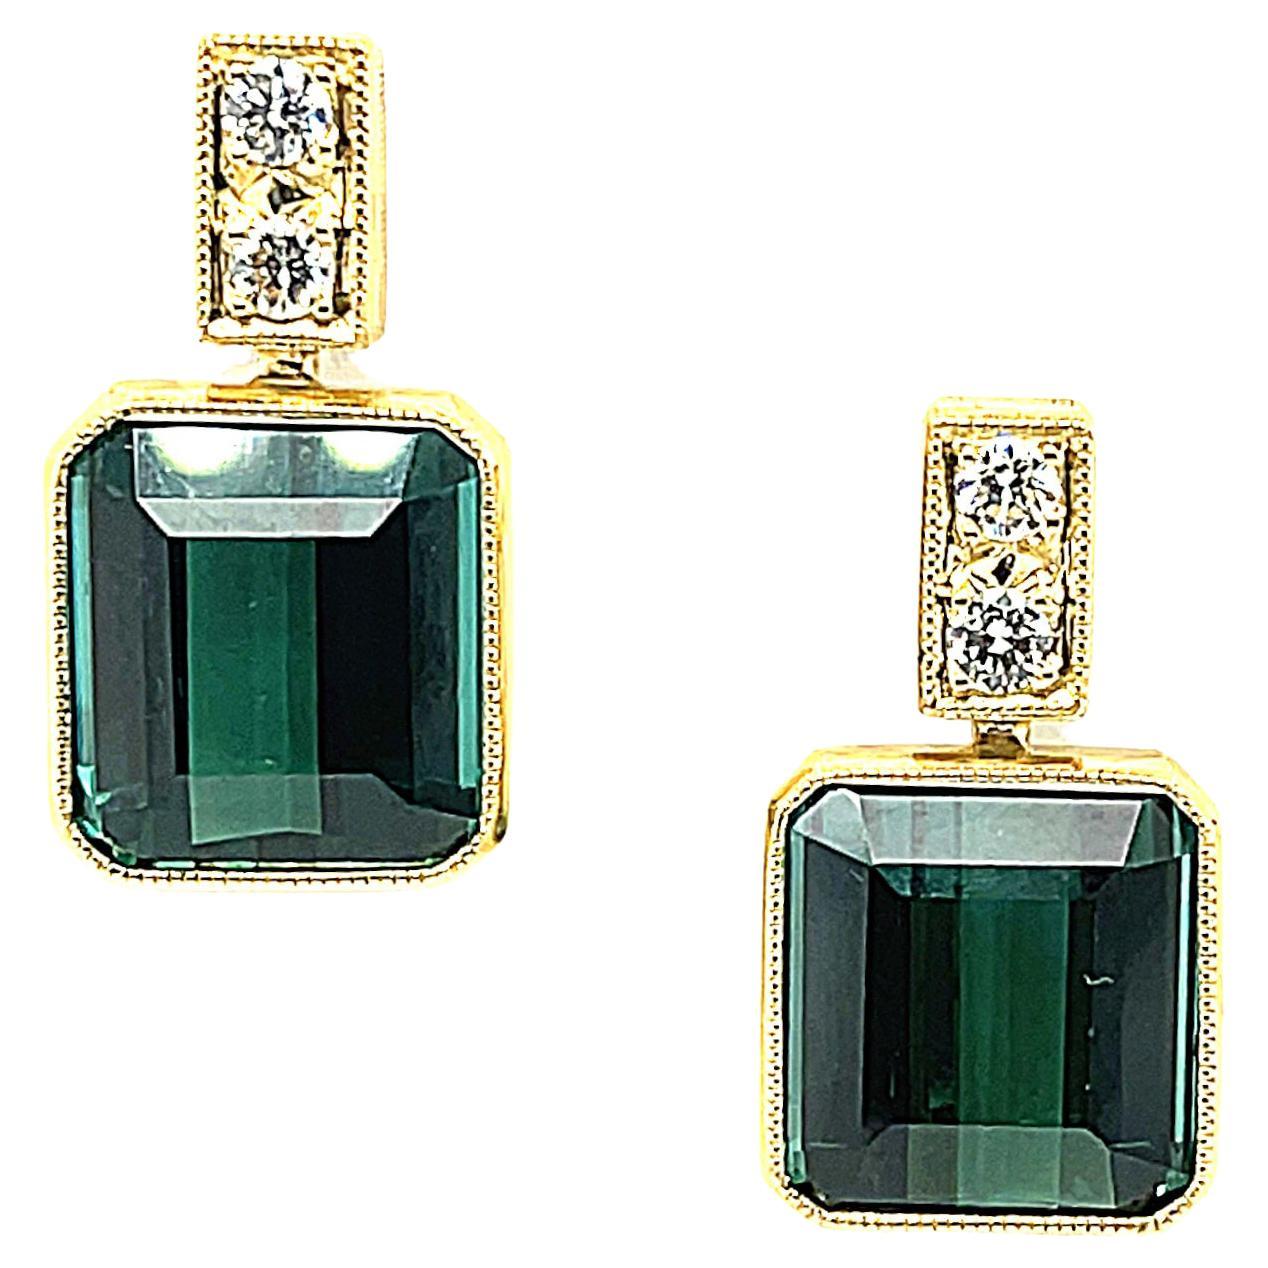 These gorgeous tourmaline and diamond earrings feature large, gem quality indicolite tourmaline with exceptional green-blue color! These gemstones are beautifully matched and so bright! They have been set in 18k yellow gold bezels that dangle from